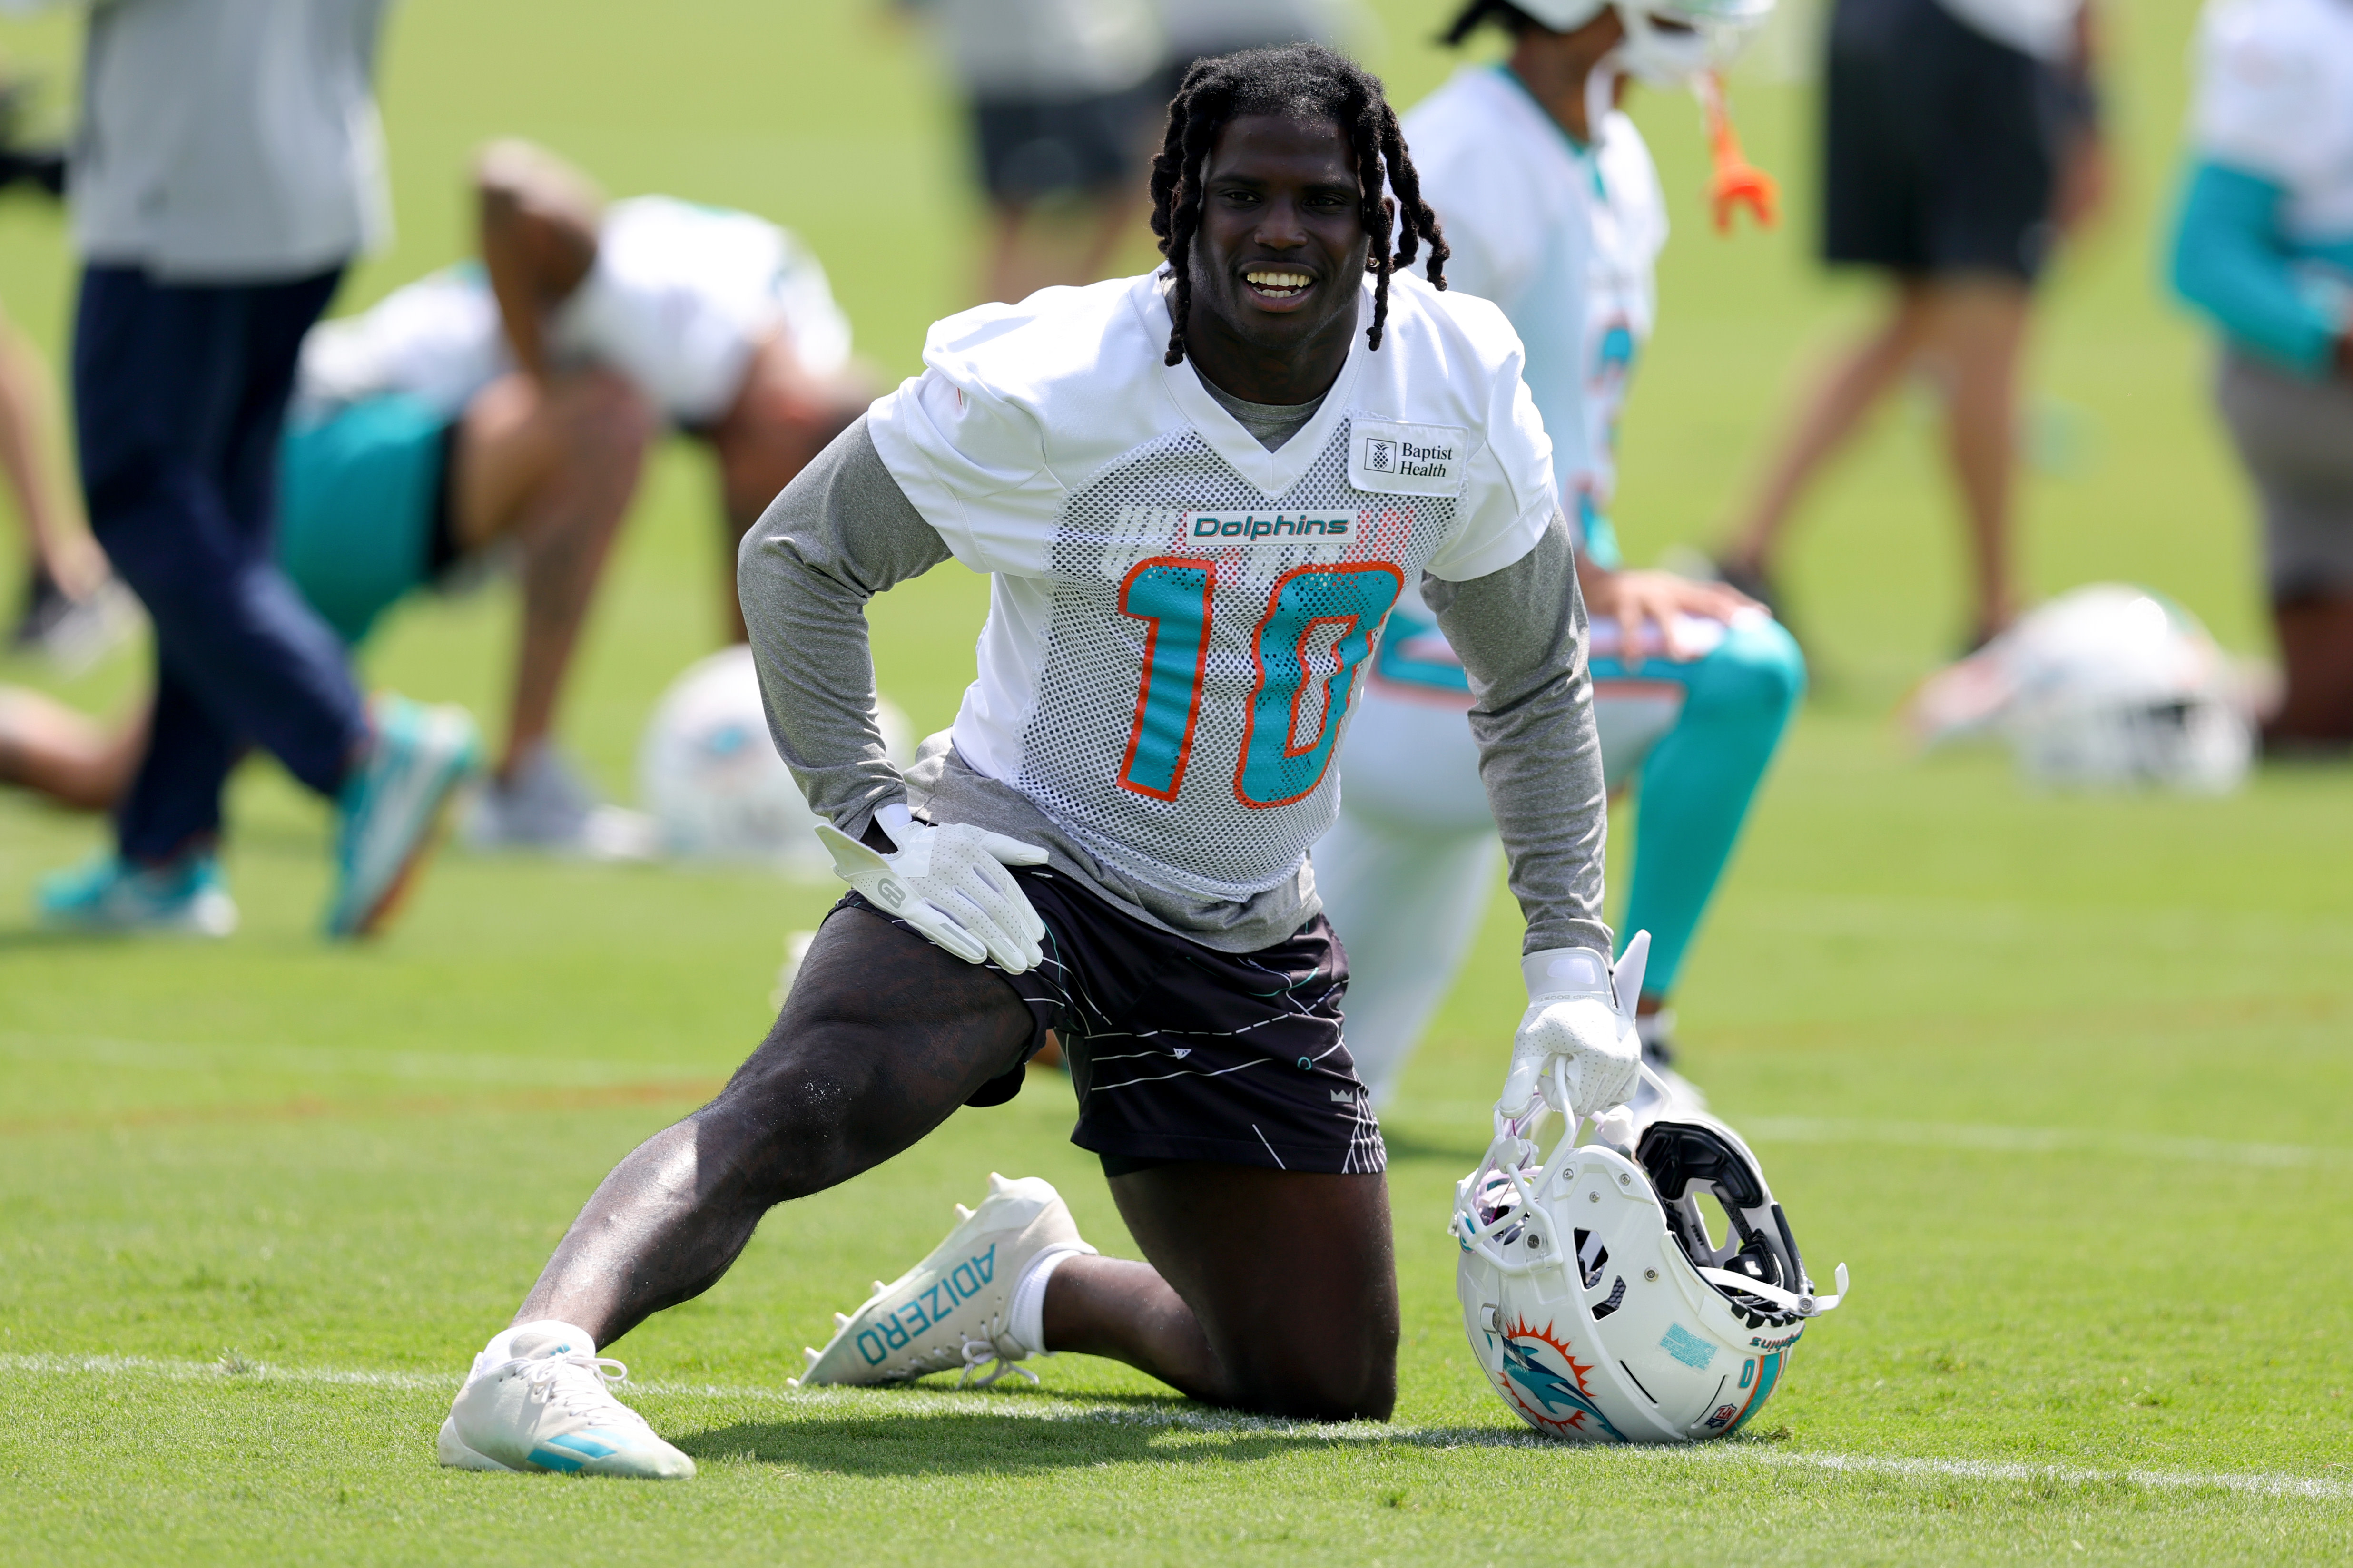 Miami Dolphins @ Tampa Bay Buccaneers Preseason Game-Week 1: Live Game  Thread & Game Information - The Phinsider